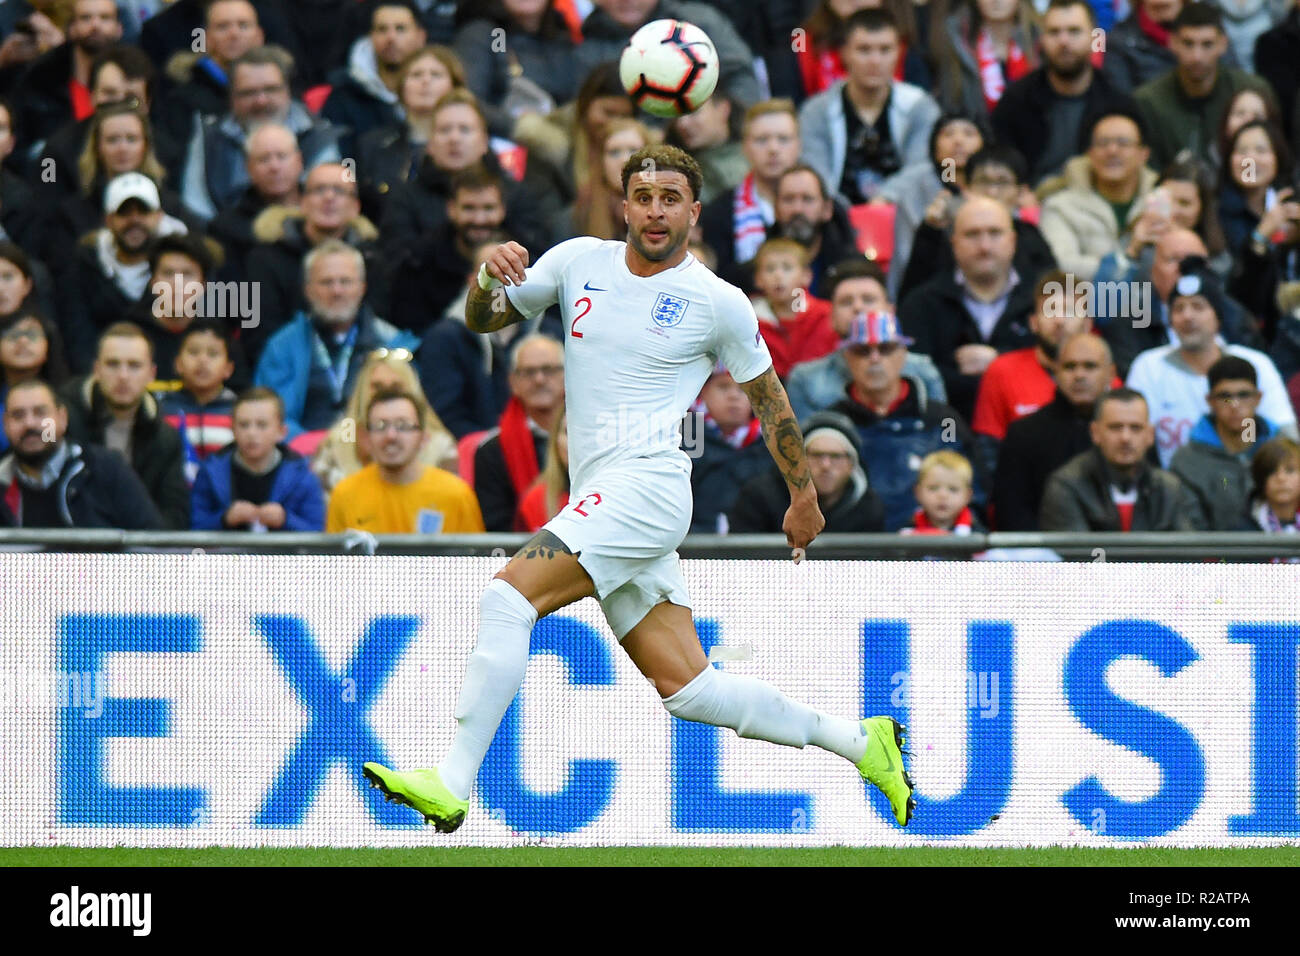 London, UK. 18th November 2018. England defender Kyle Walker (2) in action during the UEFA Nations League match between England and Croatia at Wembley Stadium, London on Sunday 18th November 2018. (©MI News & Sport Ltd | Alamy Live News) Stock Photo